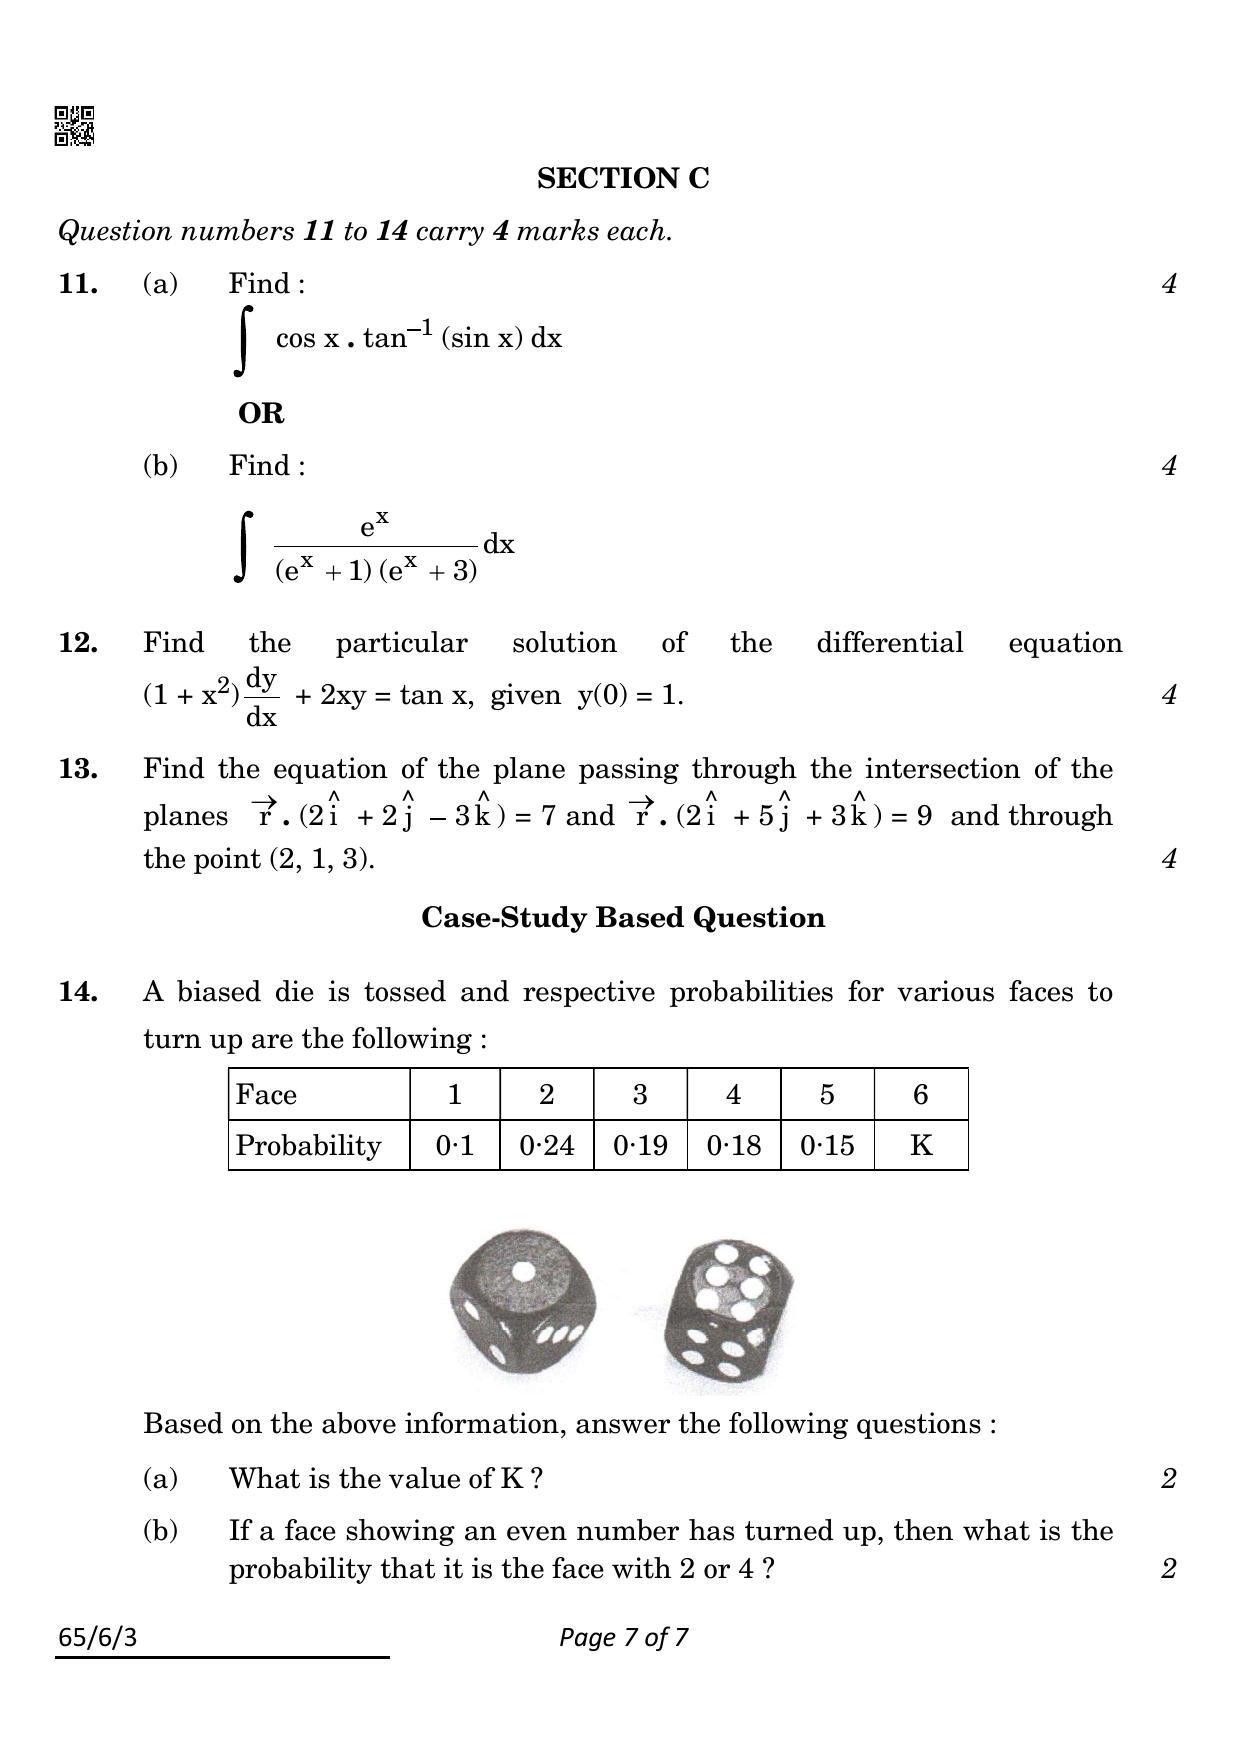 CBSE Class 12 65-6-3 Maths 2022 Compartment Question Paper - Page 7